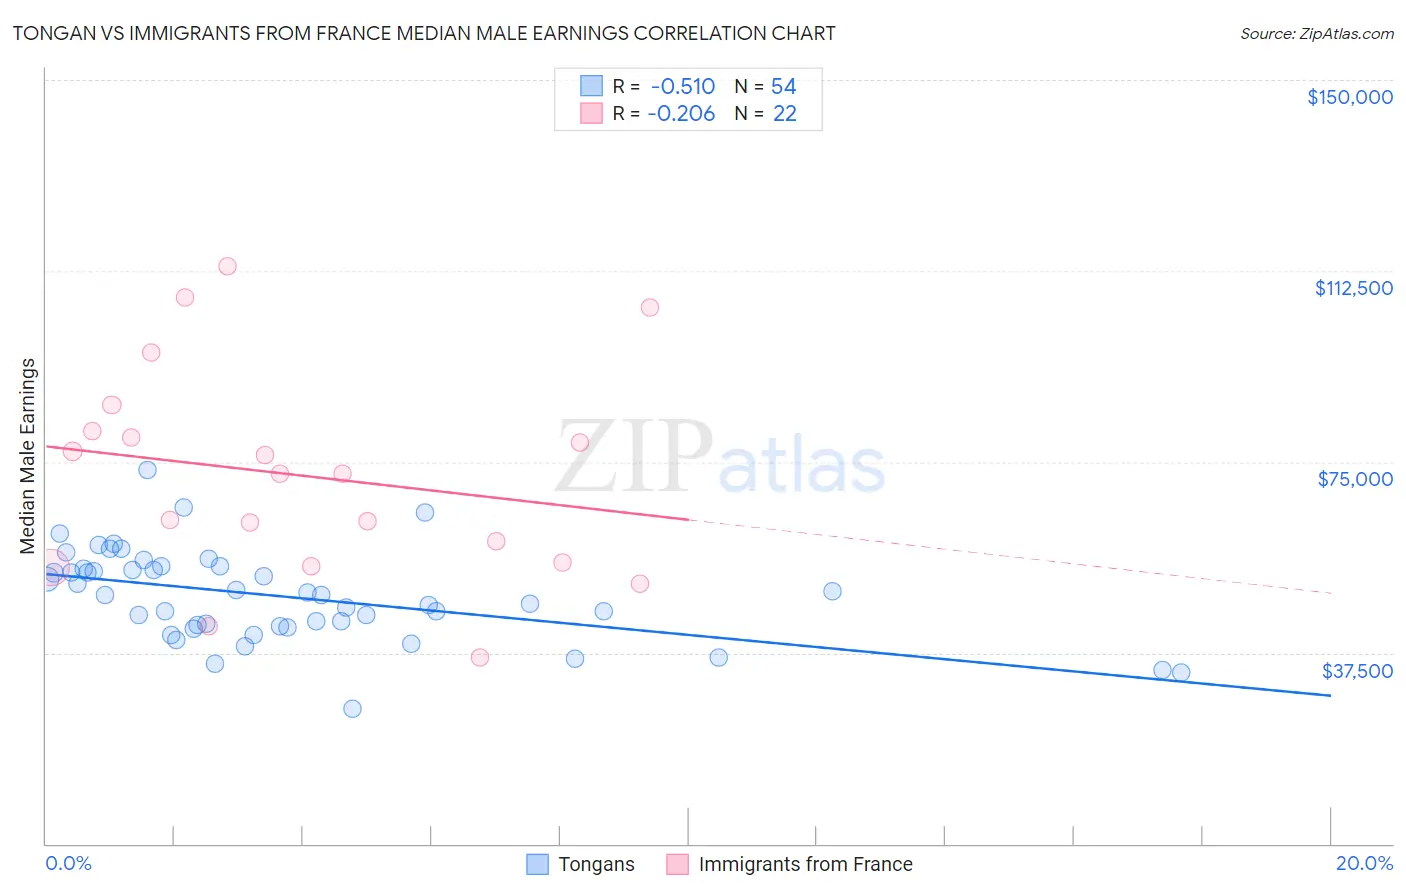 Tongan vs Immigrants from France Median Male Earnings